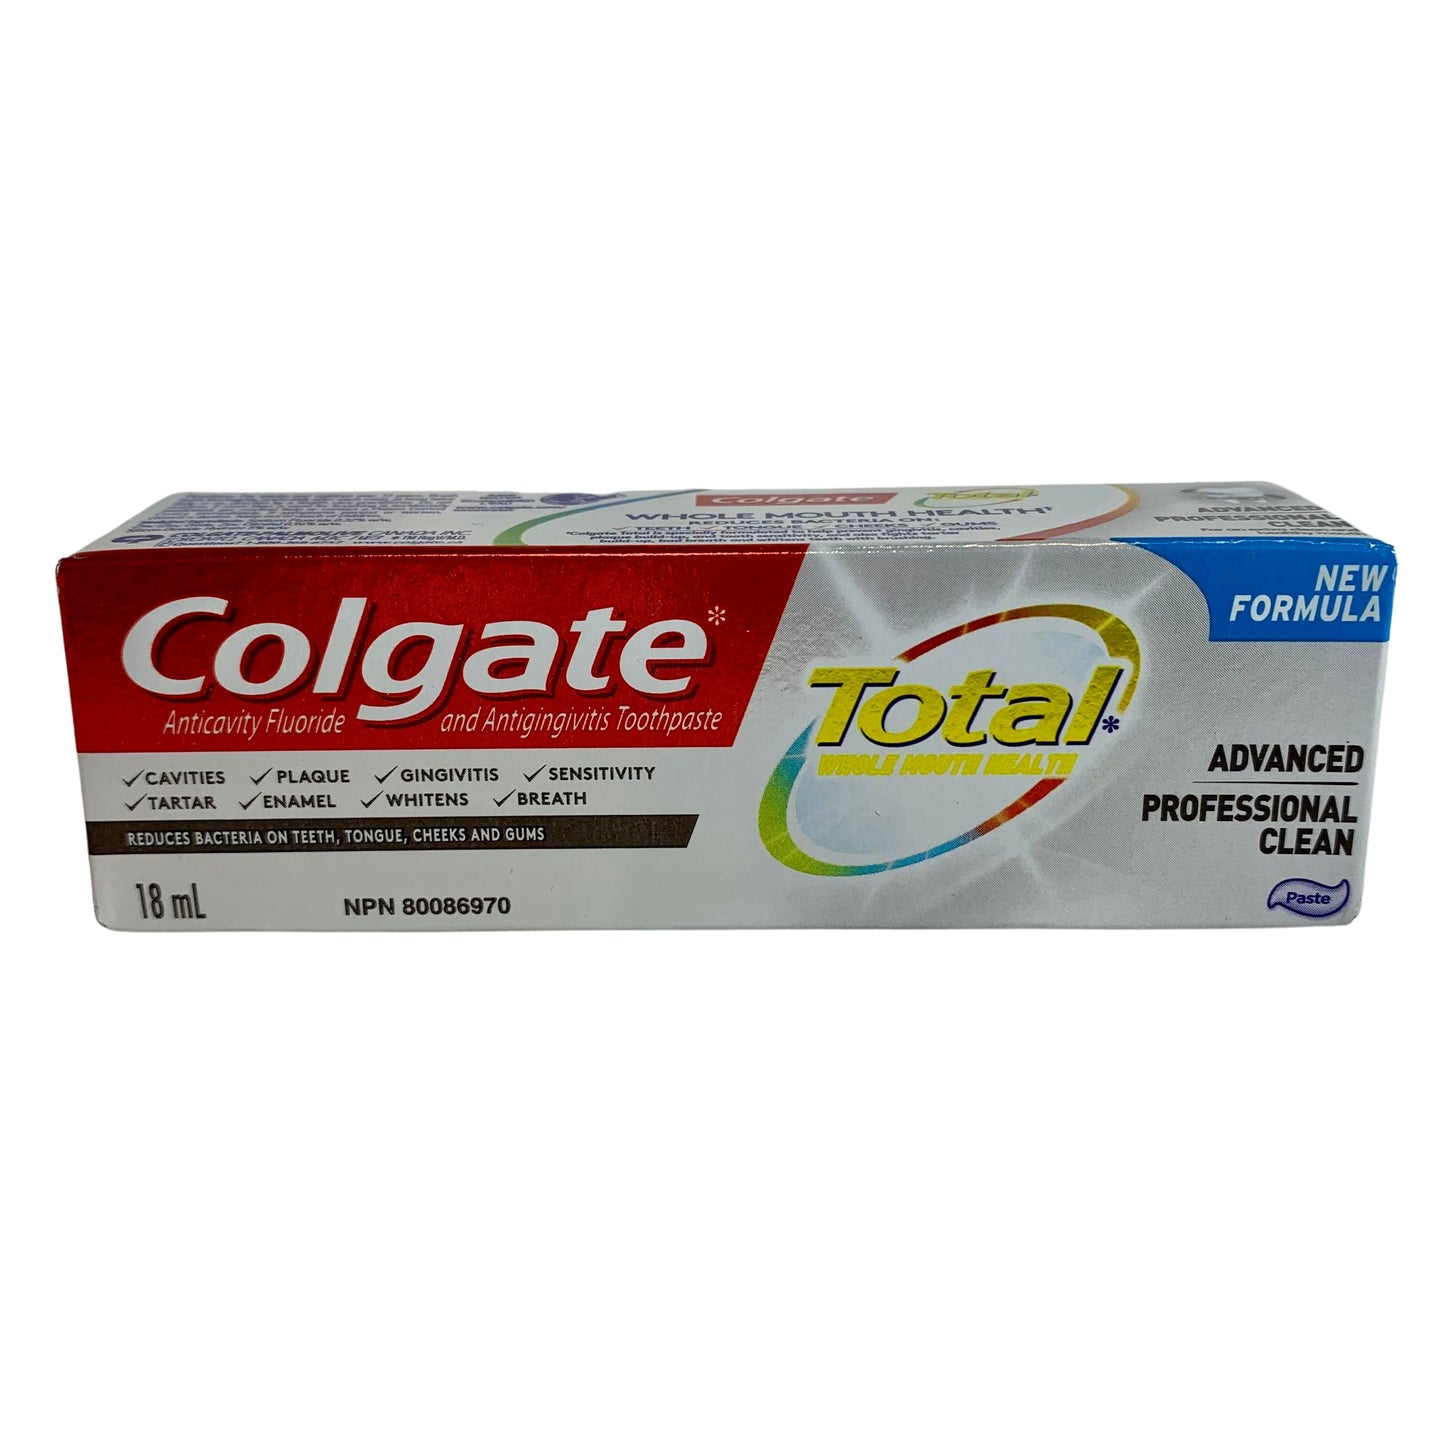 Colgate Total Toothpaste Travel Size 18 ml